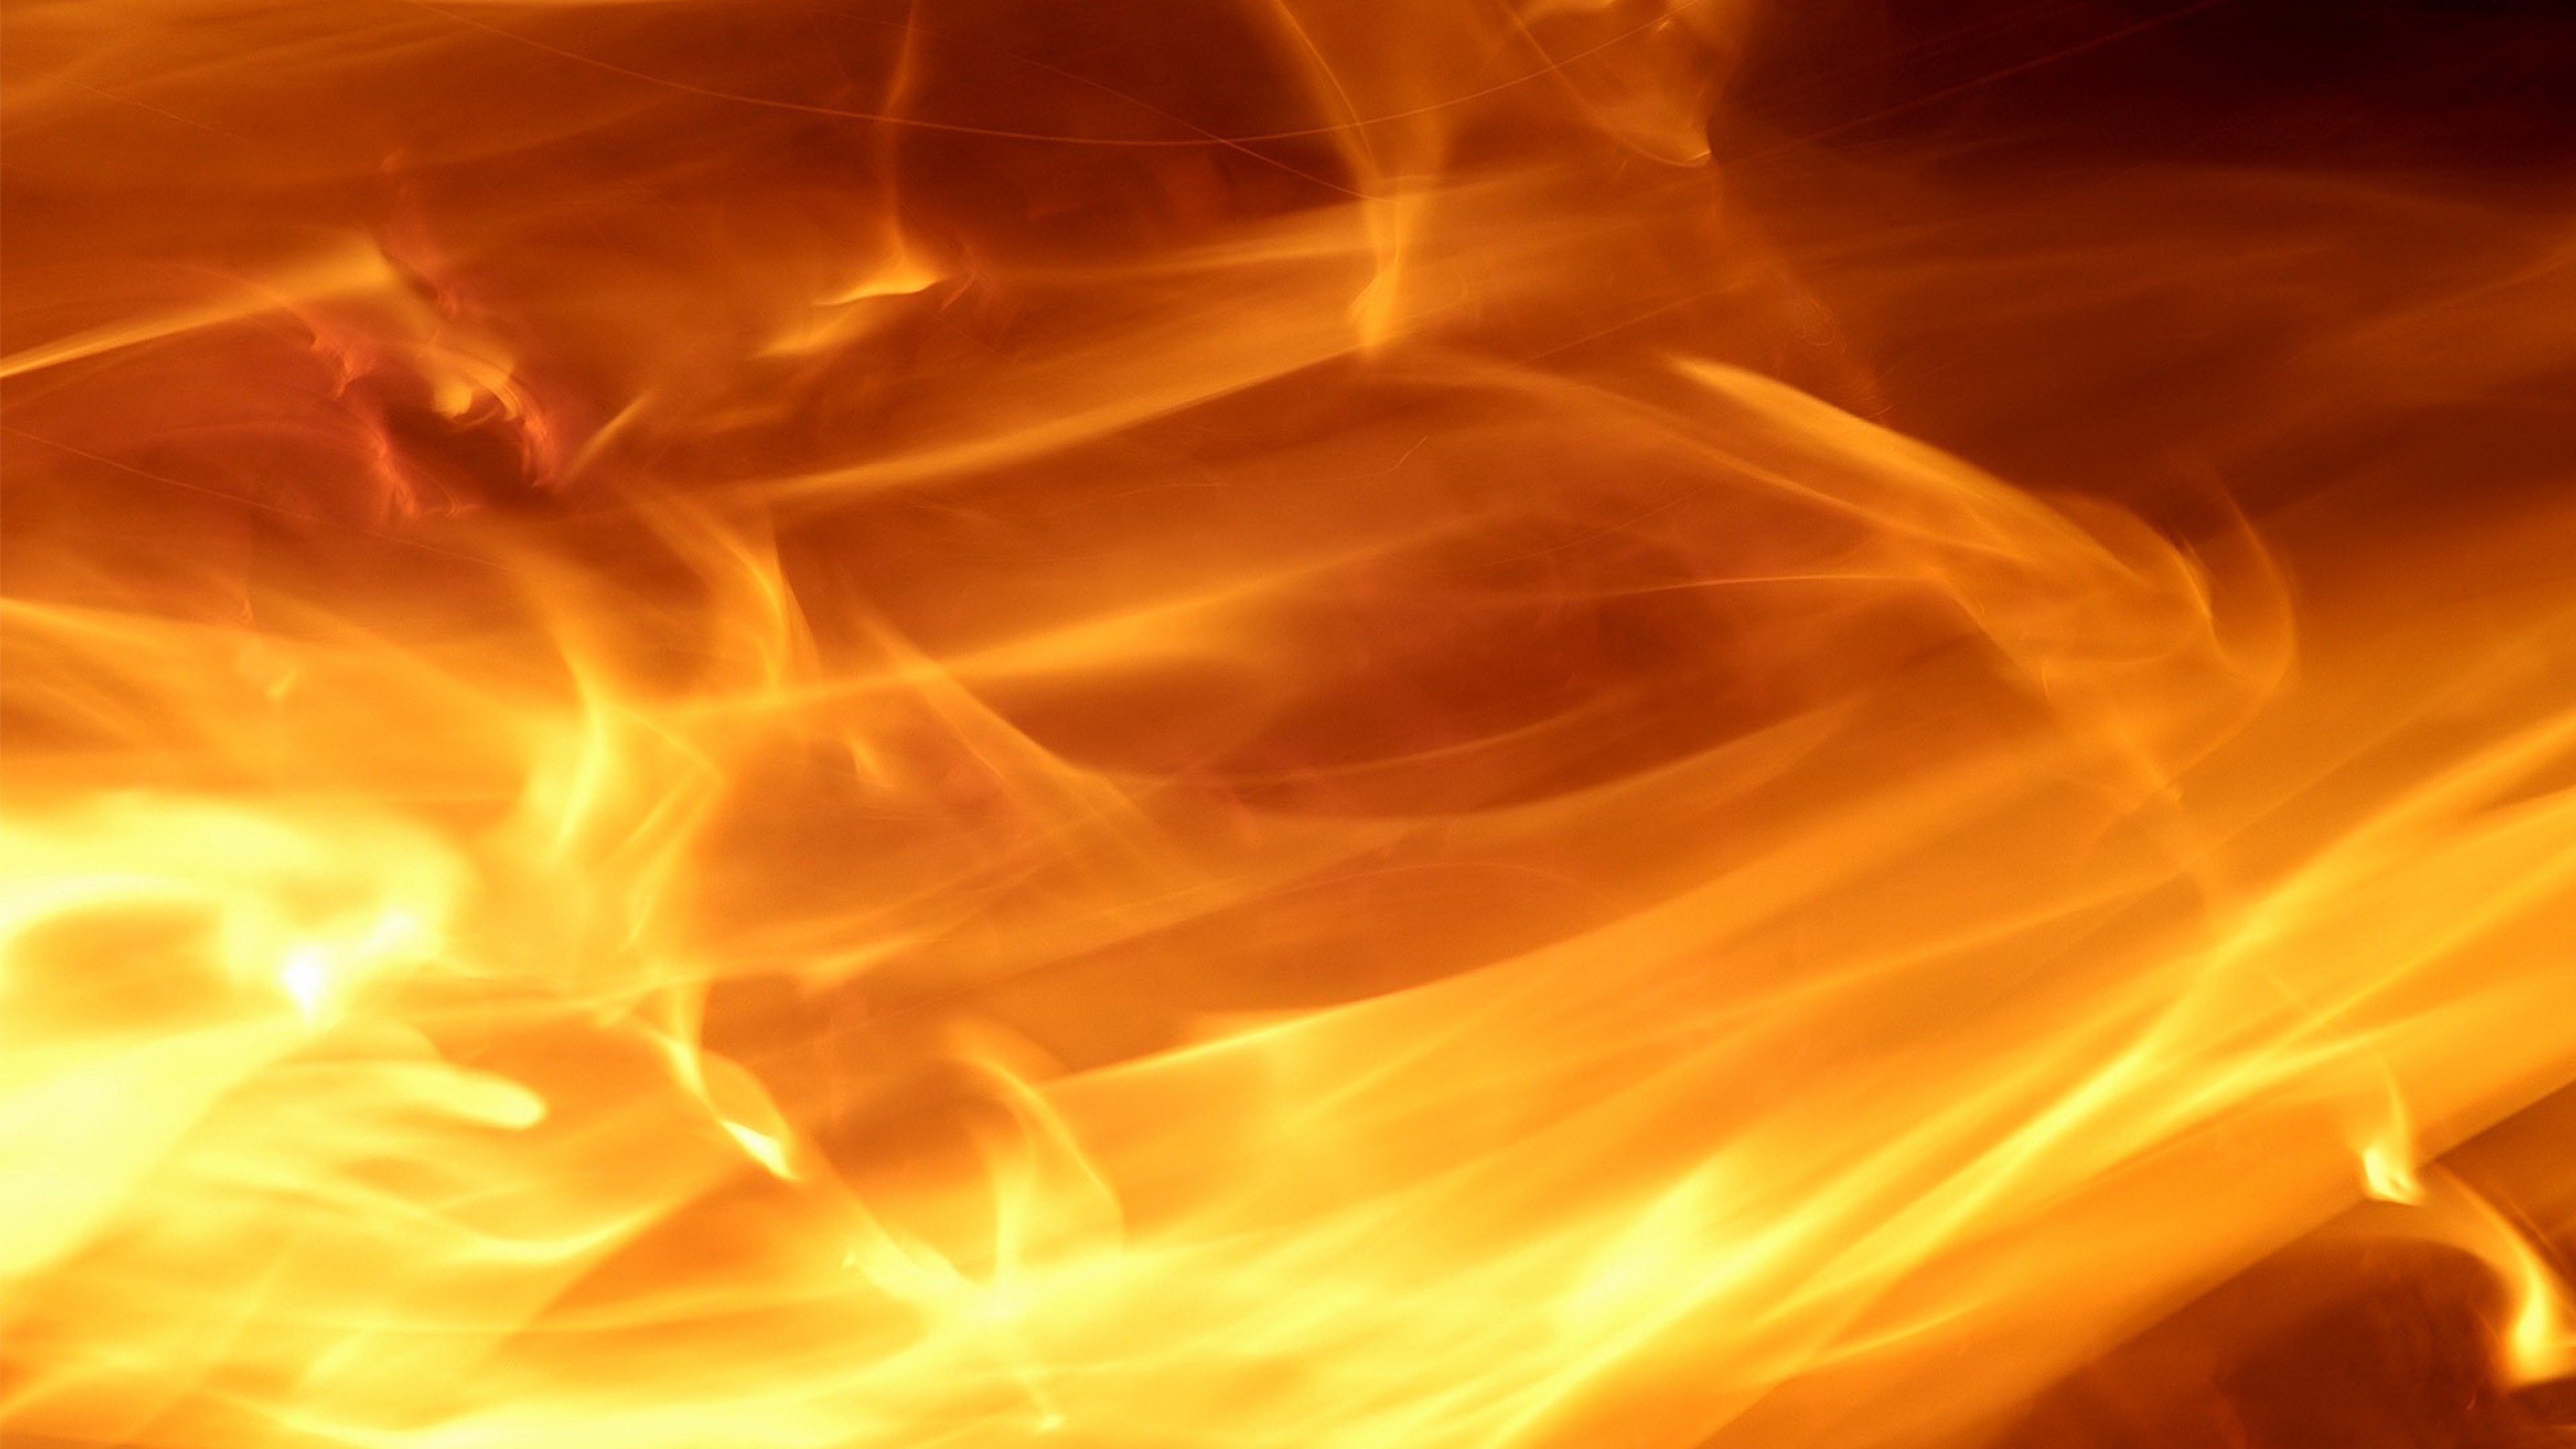 Abstract Fire Wallpaper (69+ images)